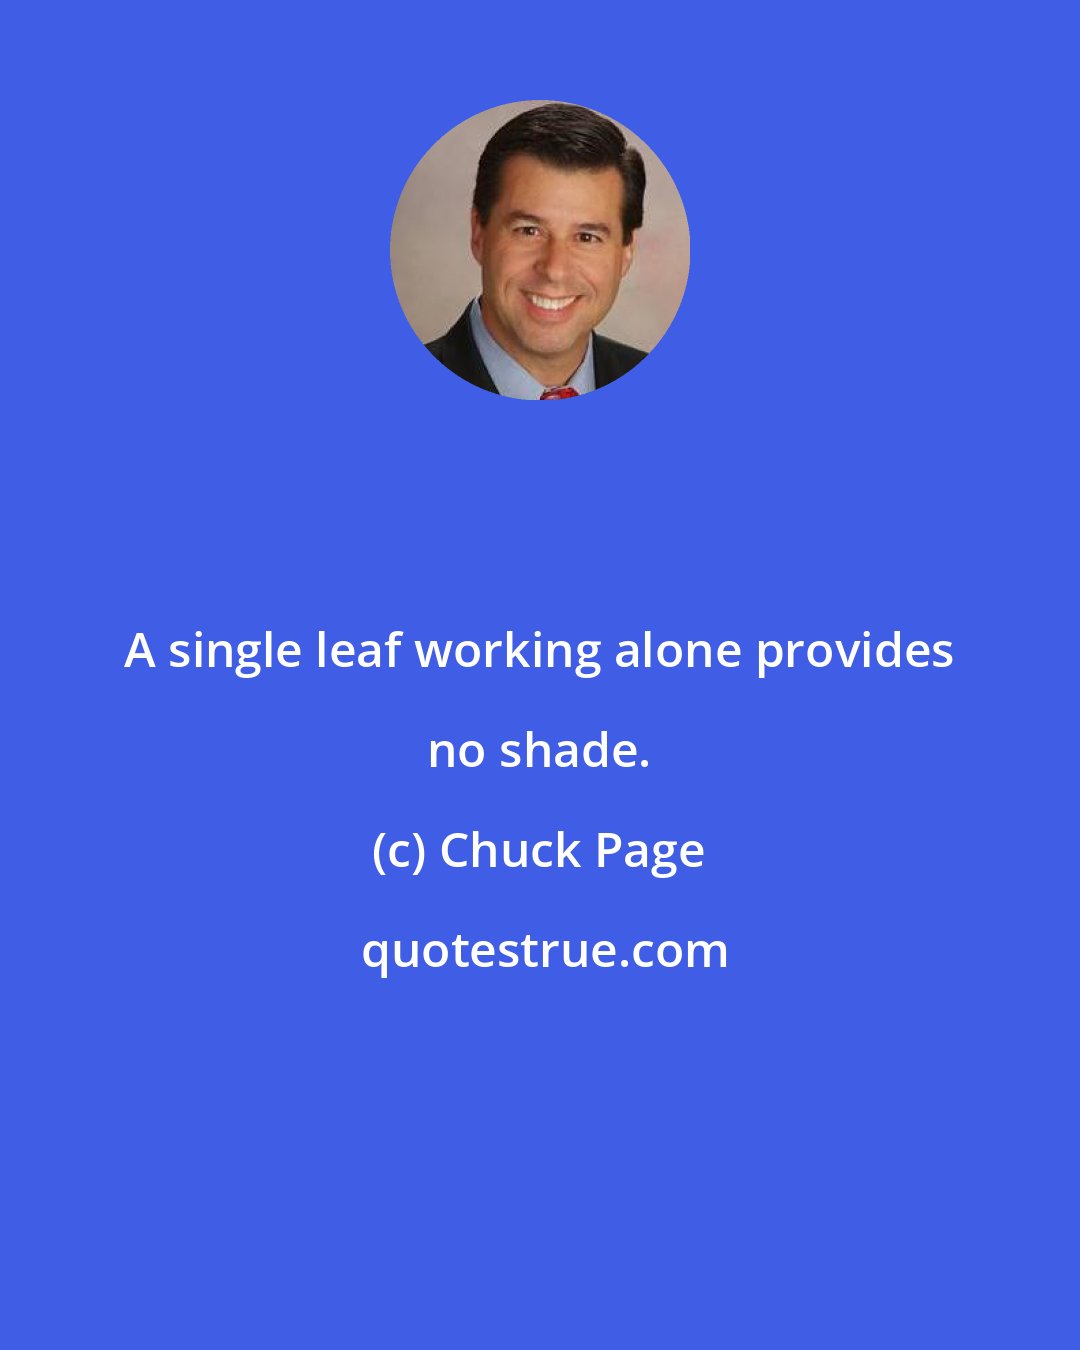 Chuck Page: A single leaf working alone provides no shade.